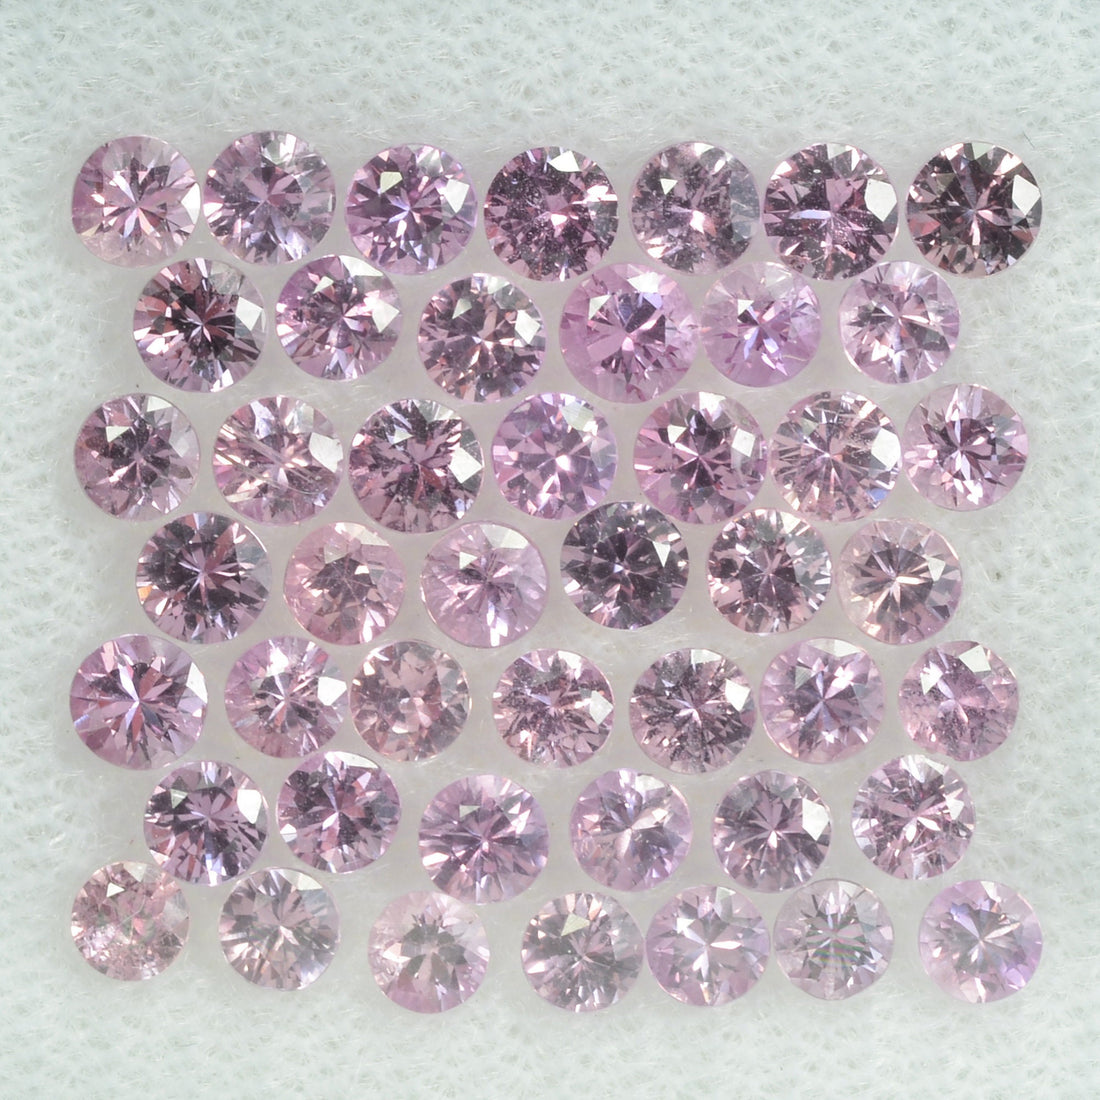 1.1-3.6 mm Natural Pink Sapphire Loose Gemstone Round Diamond Cut Cleanish Quality